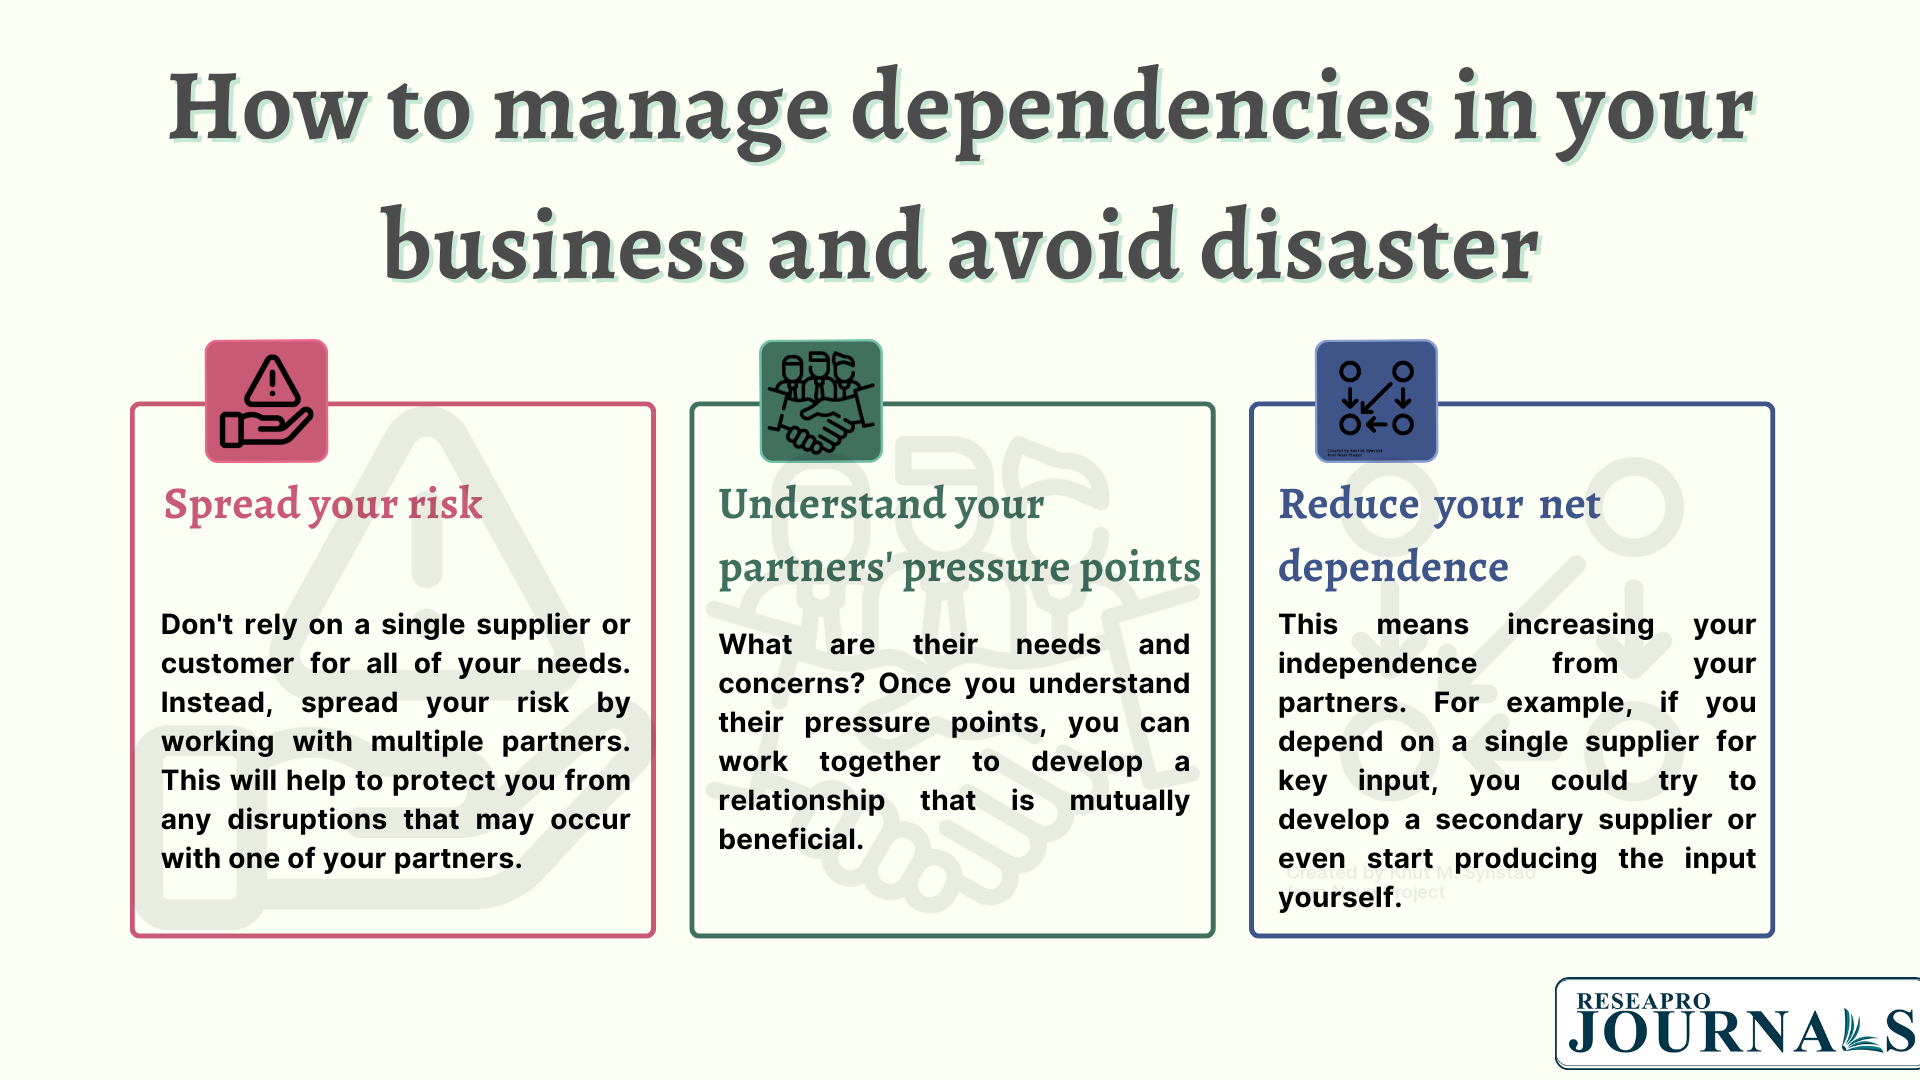 How to manage dependencies in your business and avoid disaster?